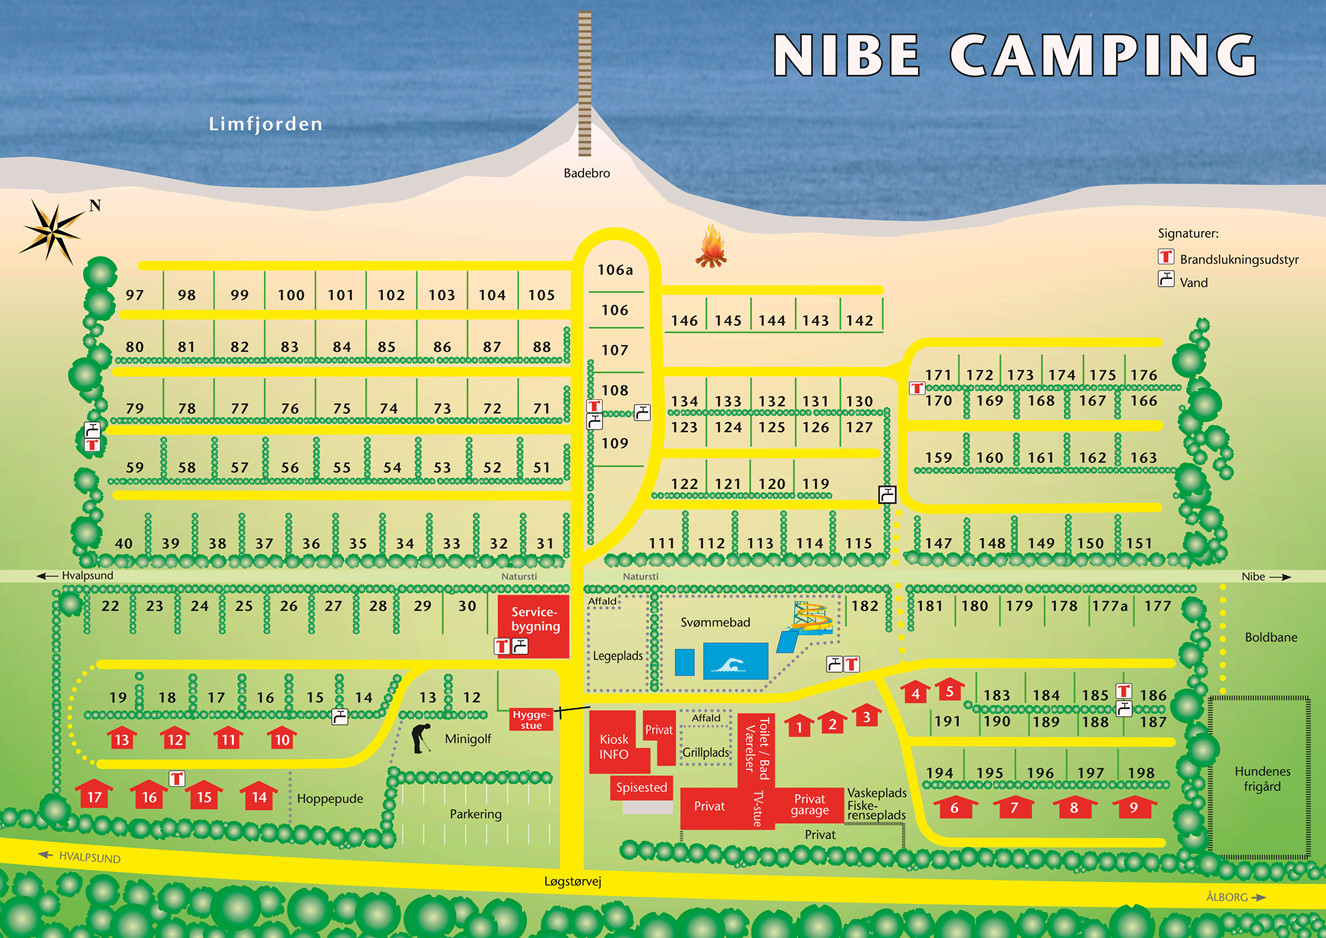 Nibe_Camping_aalborg_denmark_space_overvie_